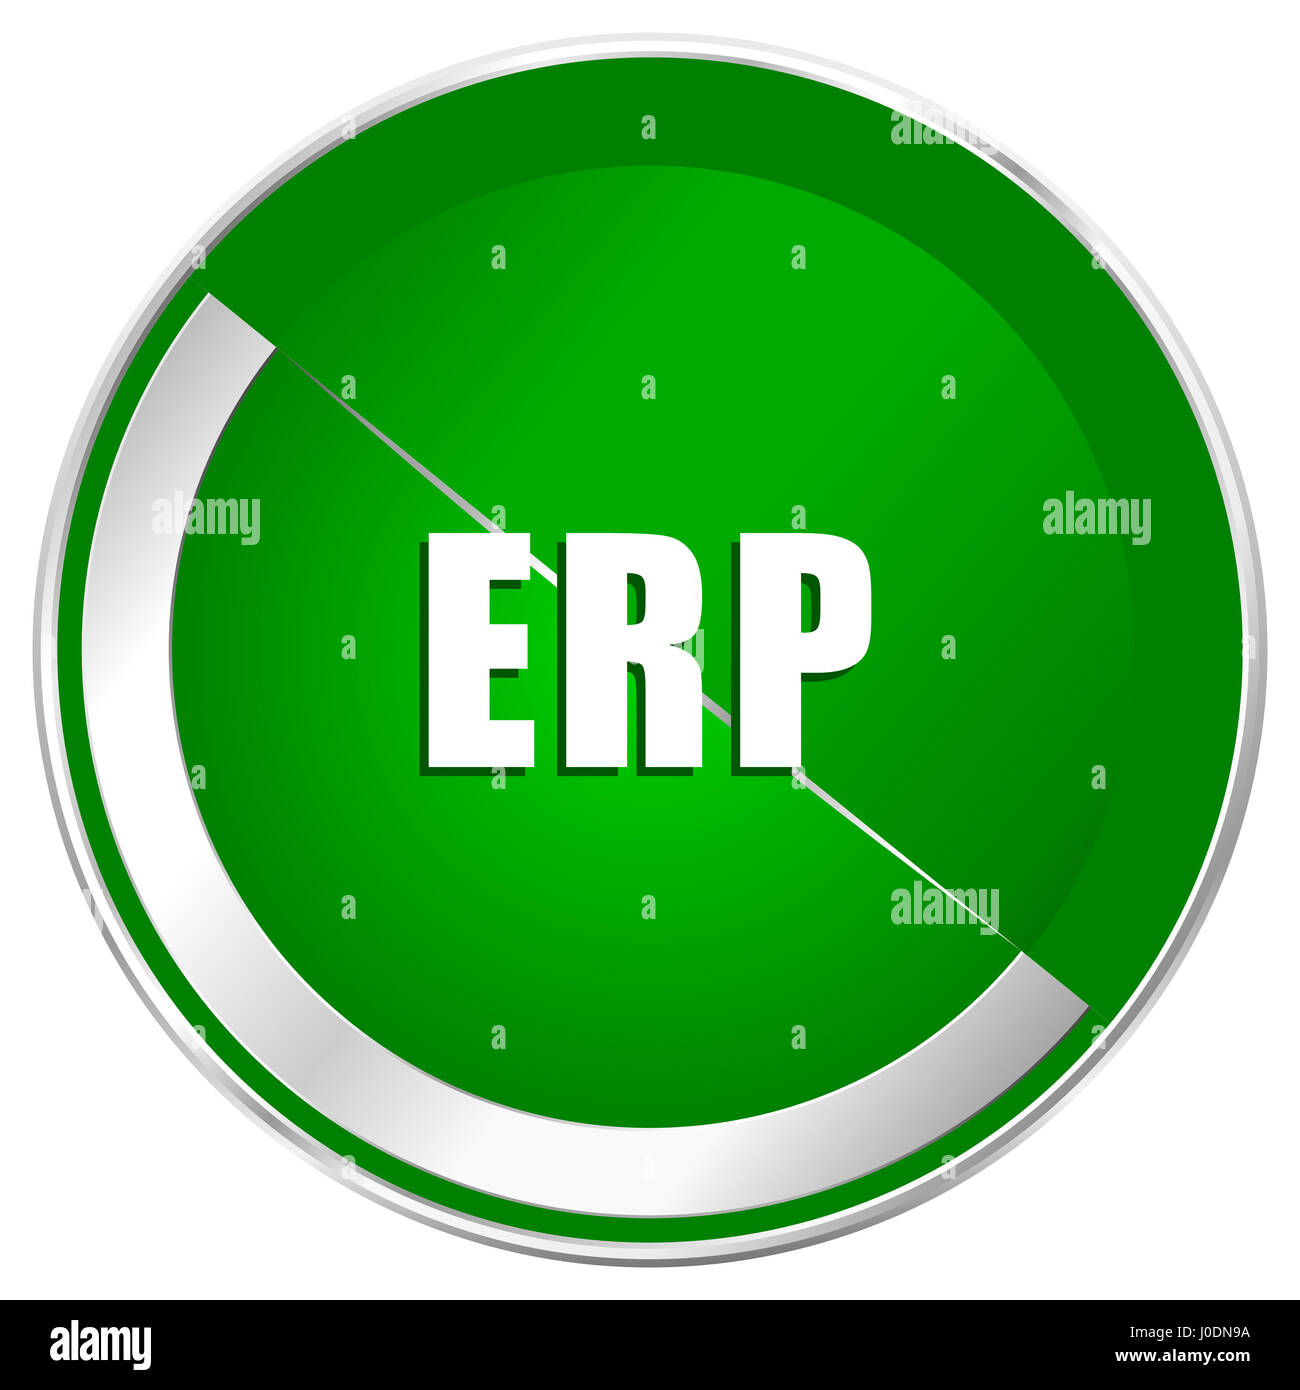 Erp silver metallic border green web icon for mobile apps and internet. Stock Photo